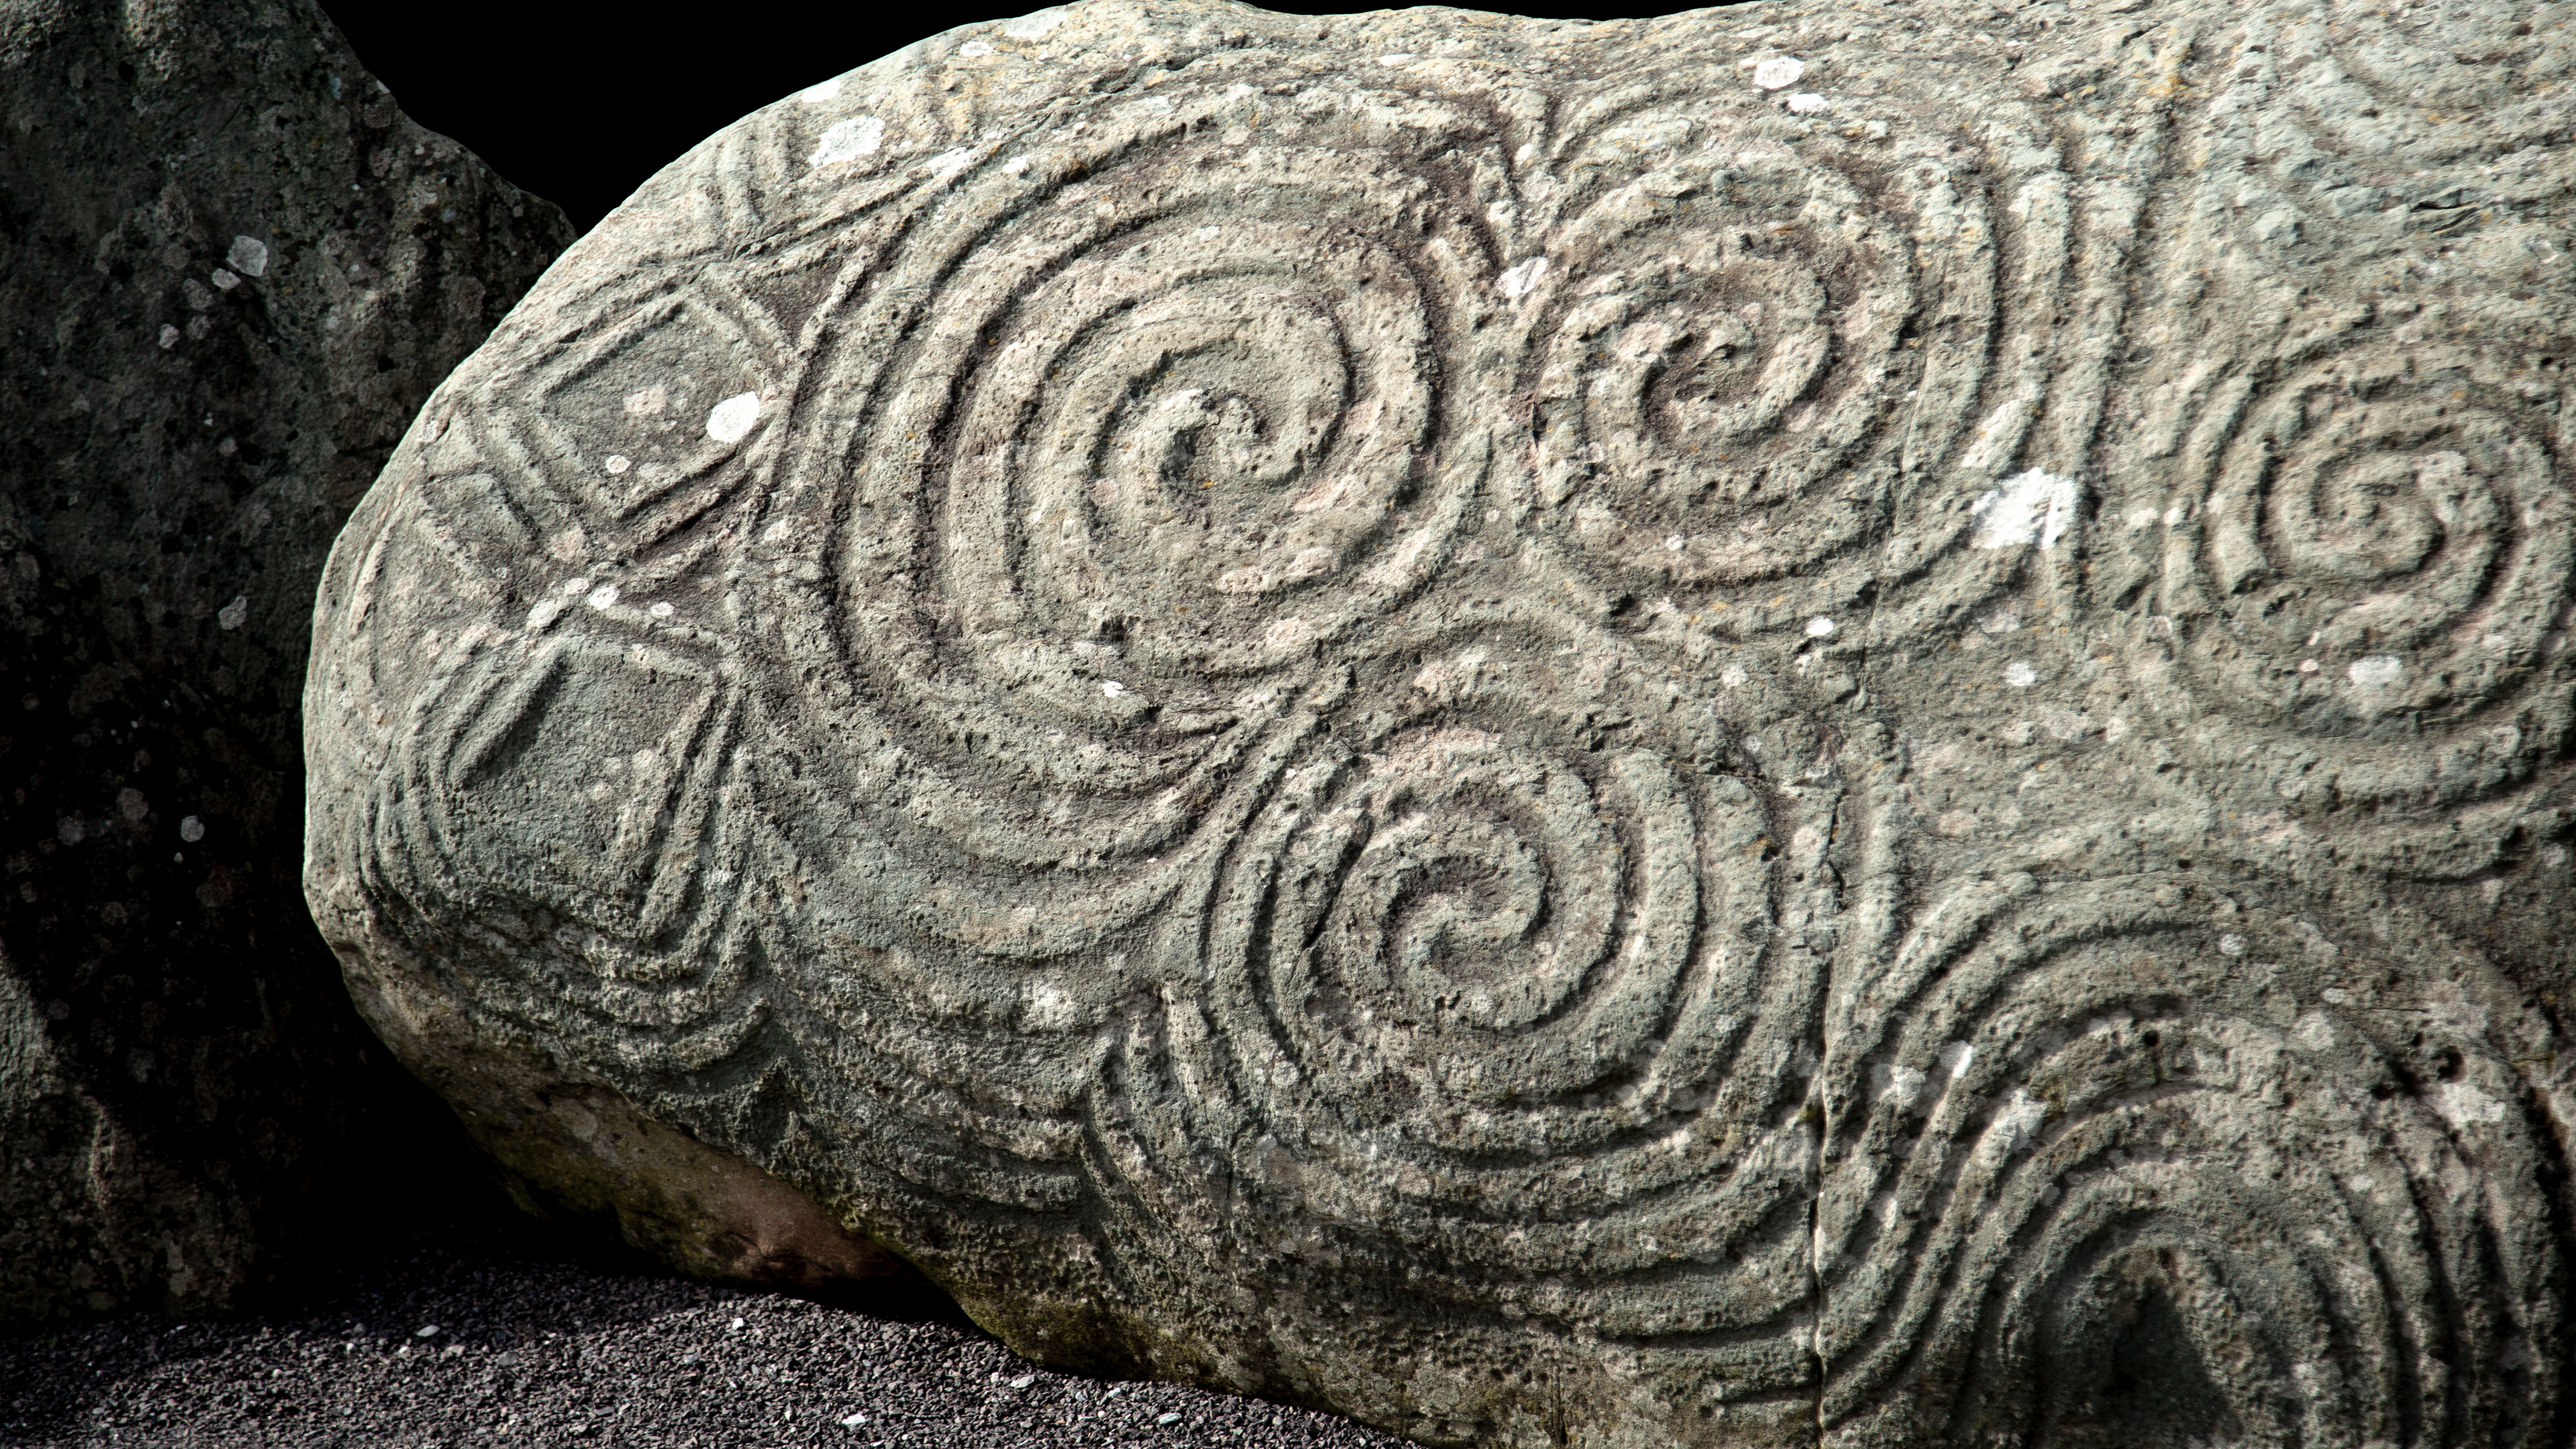 a cylindrical stone covered with overlapping circles from close up